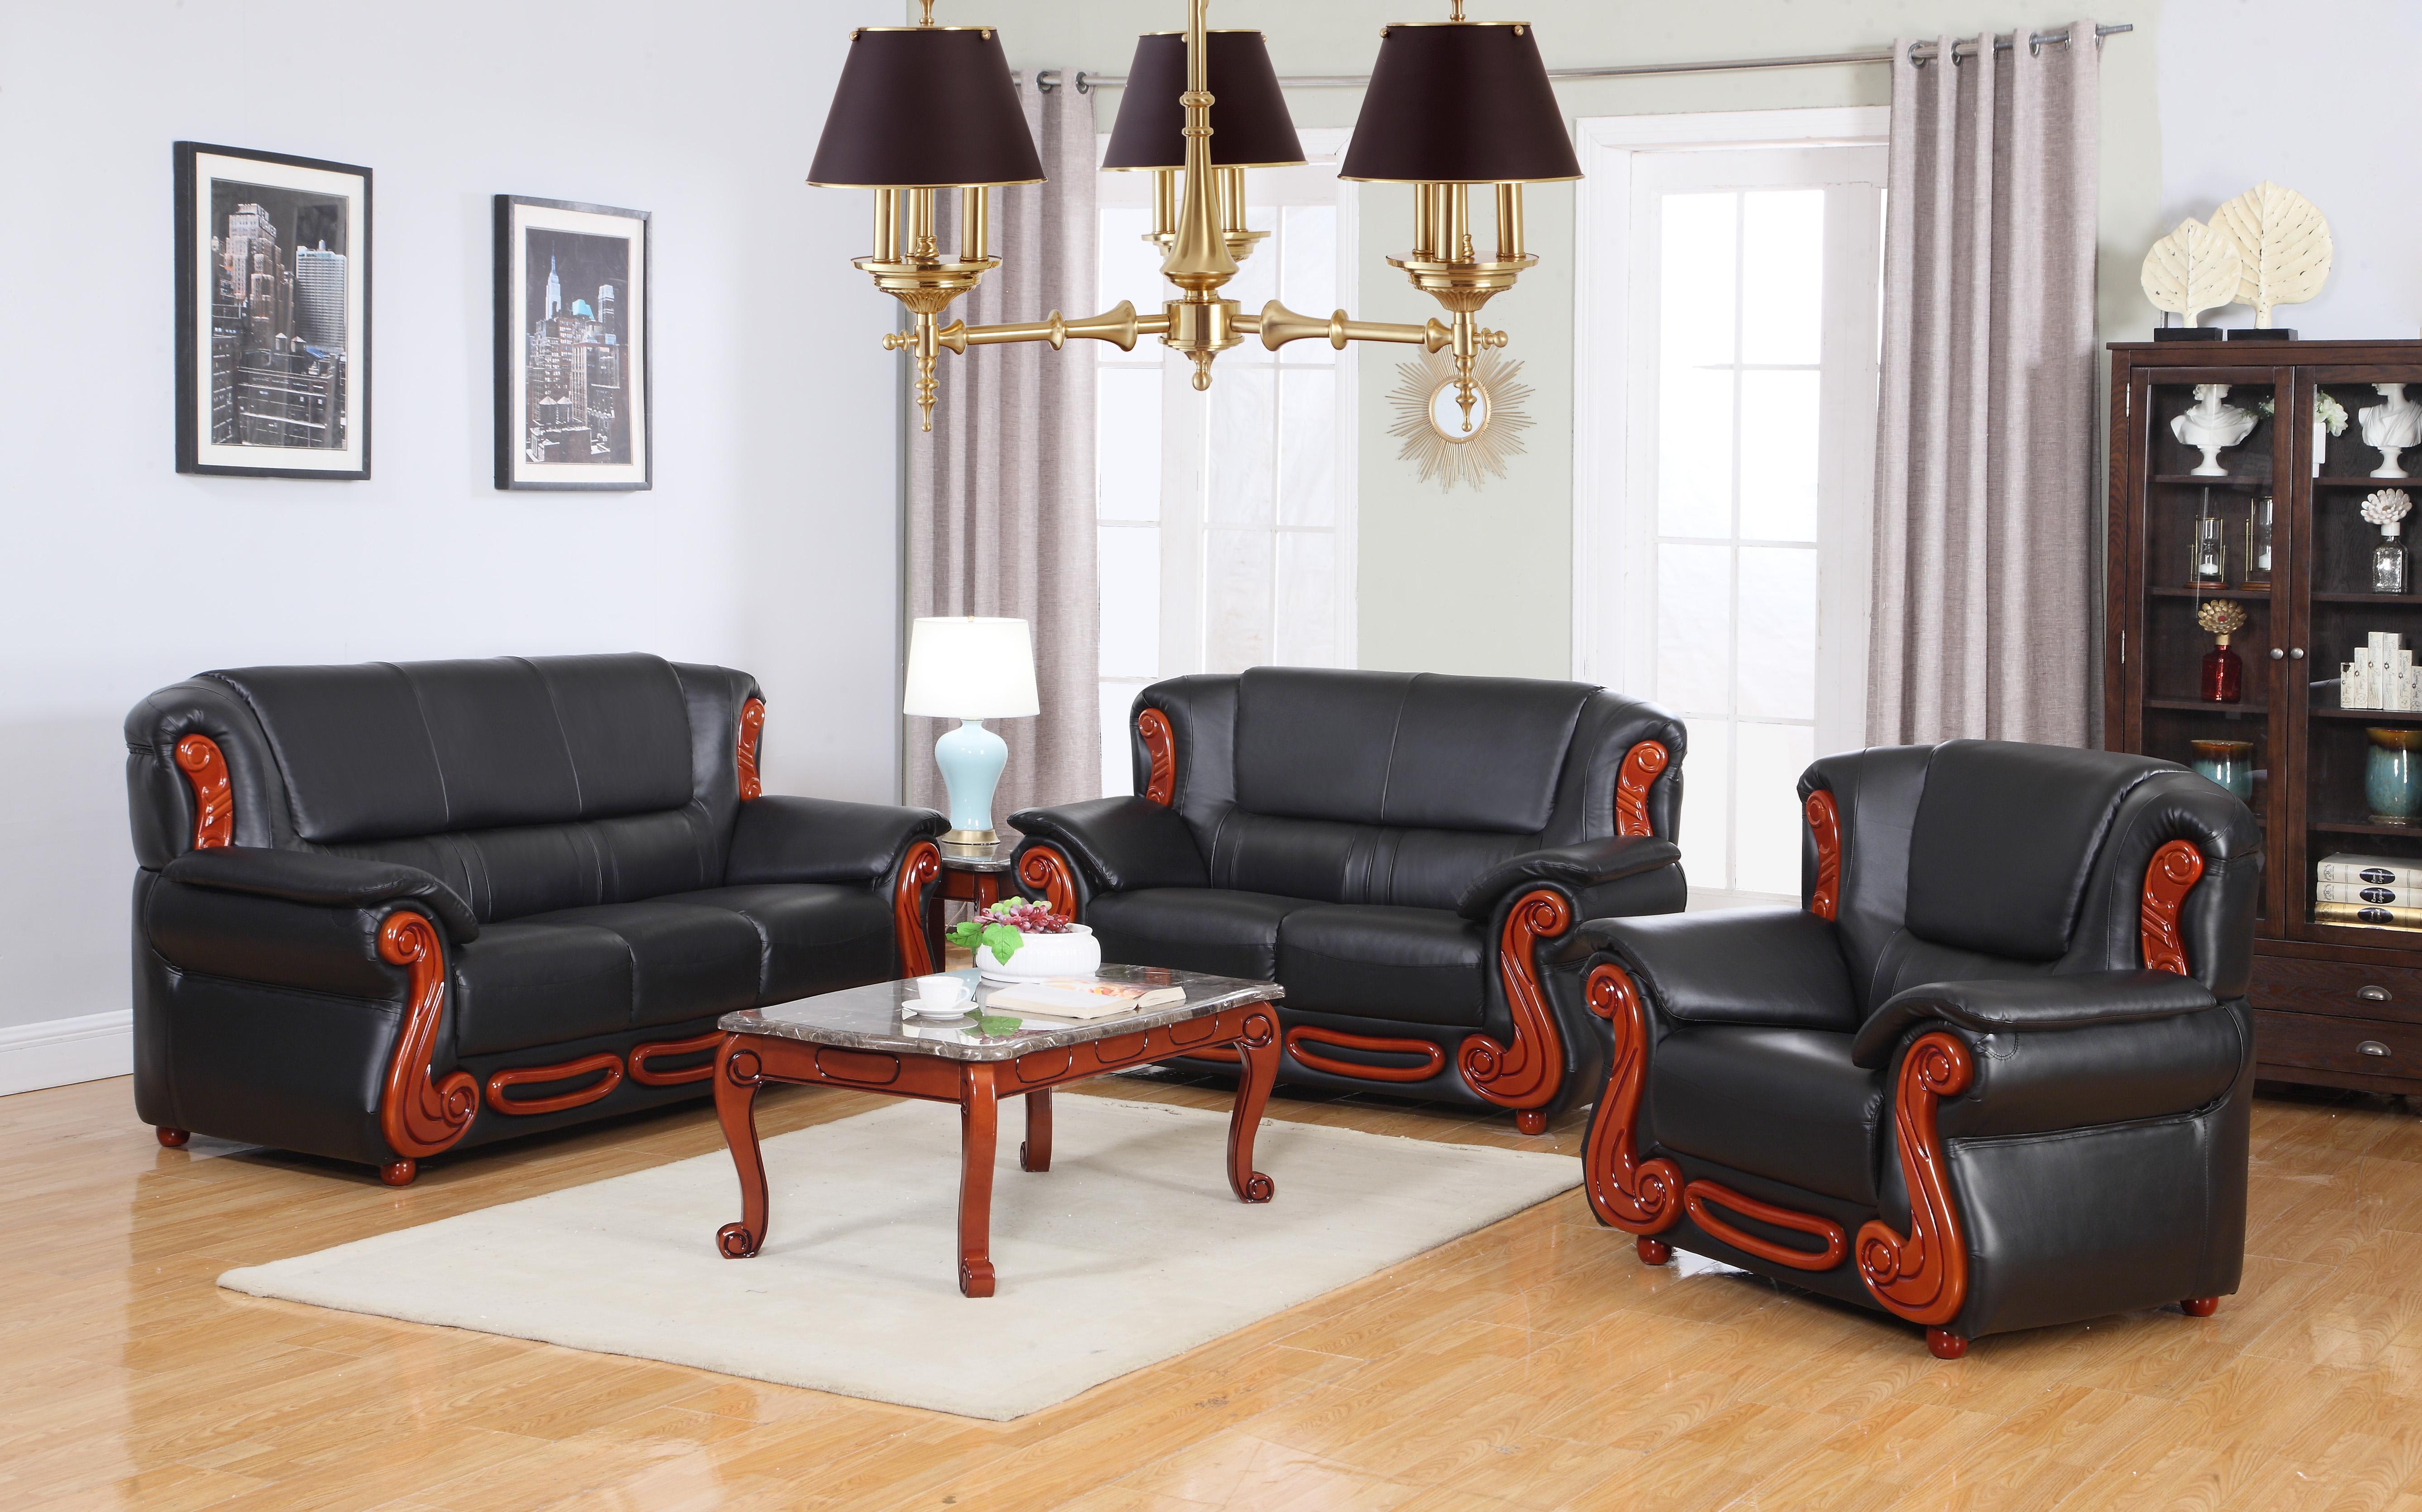 

    
Meridian 632 Bella  Black Bonded Leather Living Room Set 3Ps Traditional Classic
